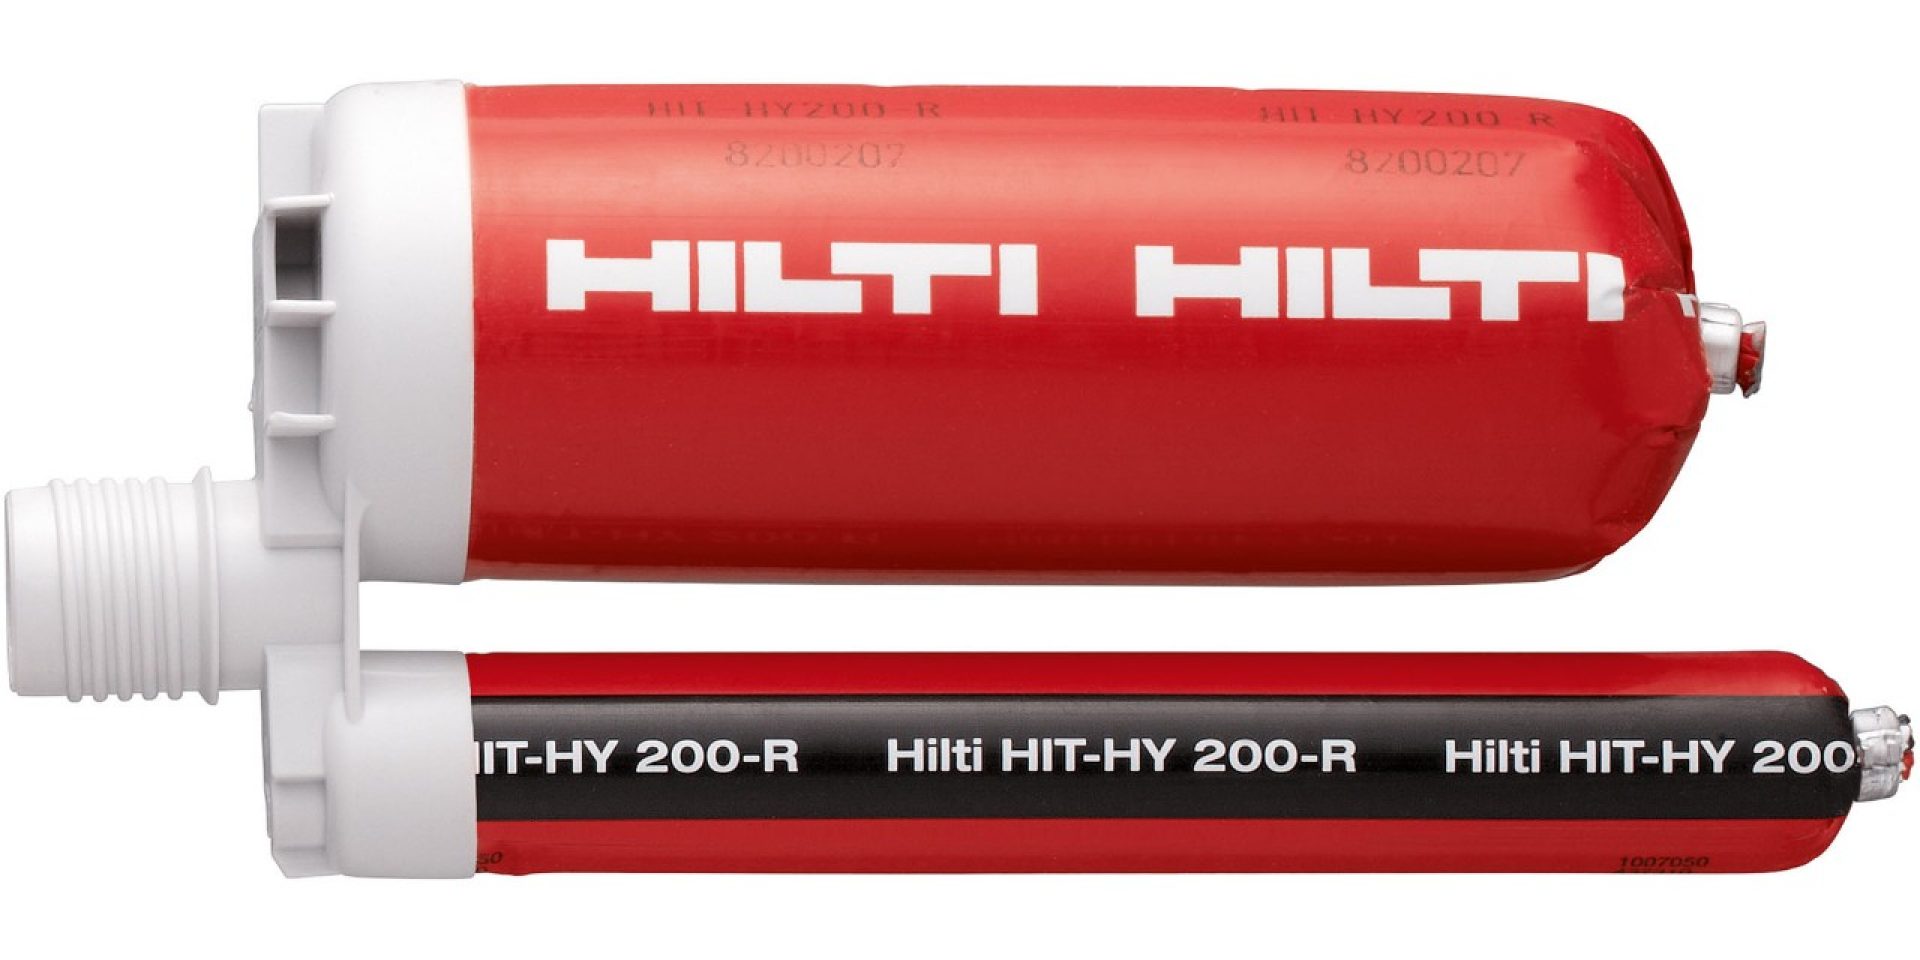 HIT-HY 200-R ultimate-performance hybrid mortar as part of the Hilti SafeSet system for rebar connections and heavy anchoring